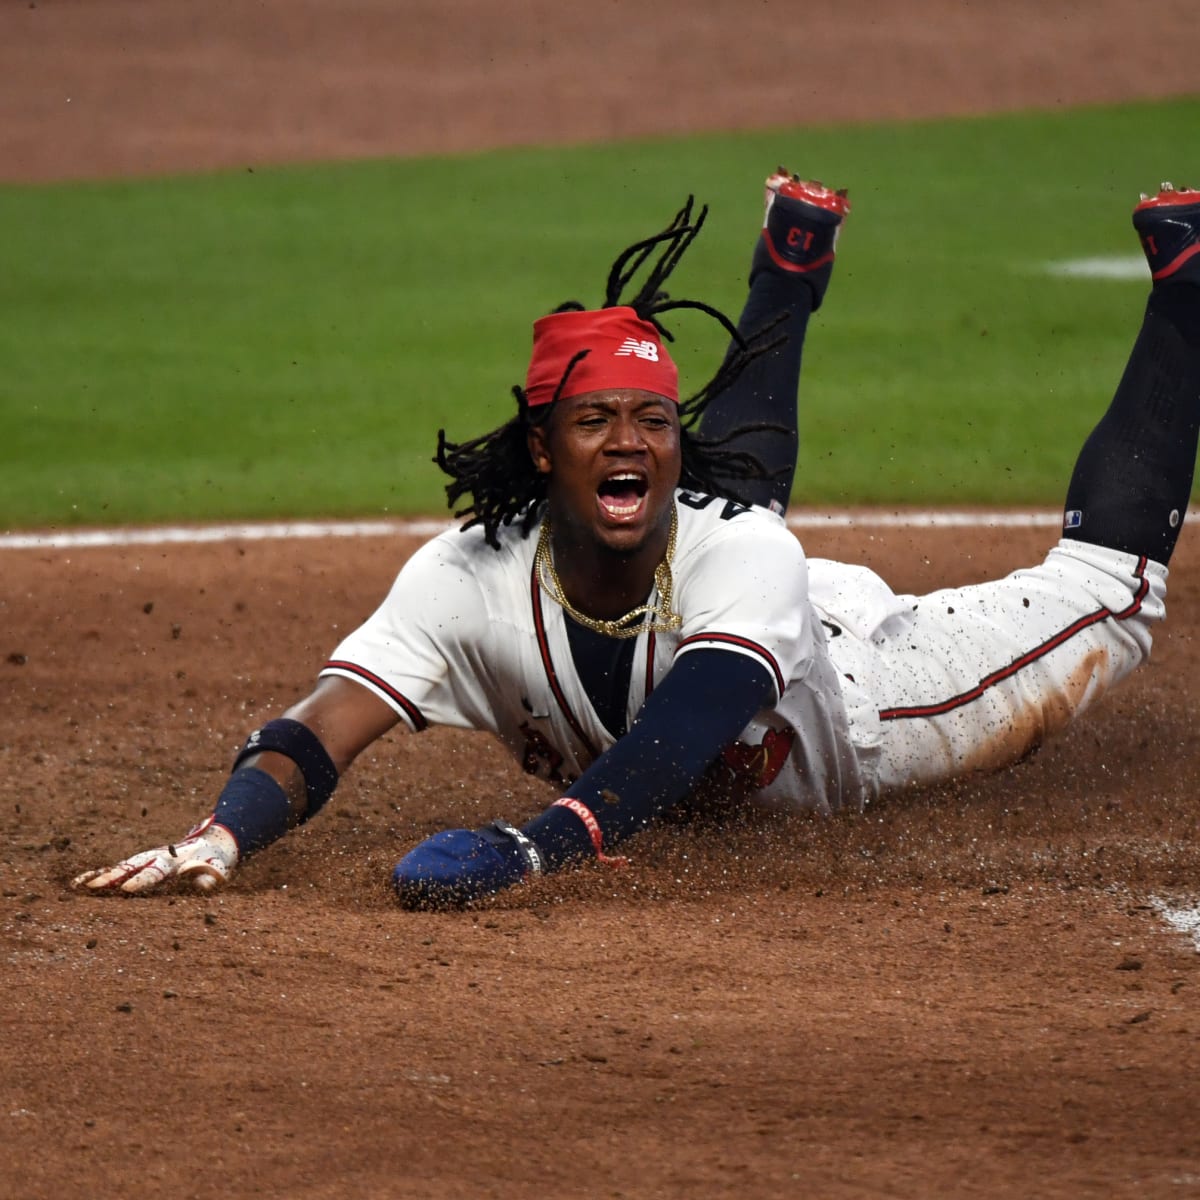 Atlanta Braves outfielder Ronald Acuna, Jr. placed on 10-day IL